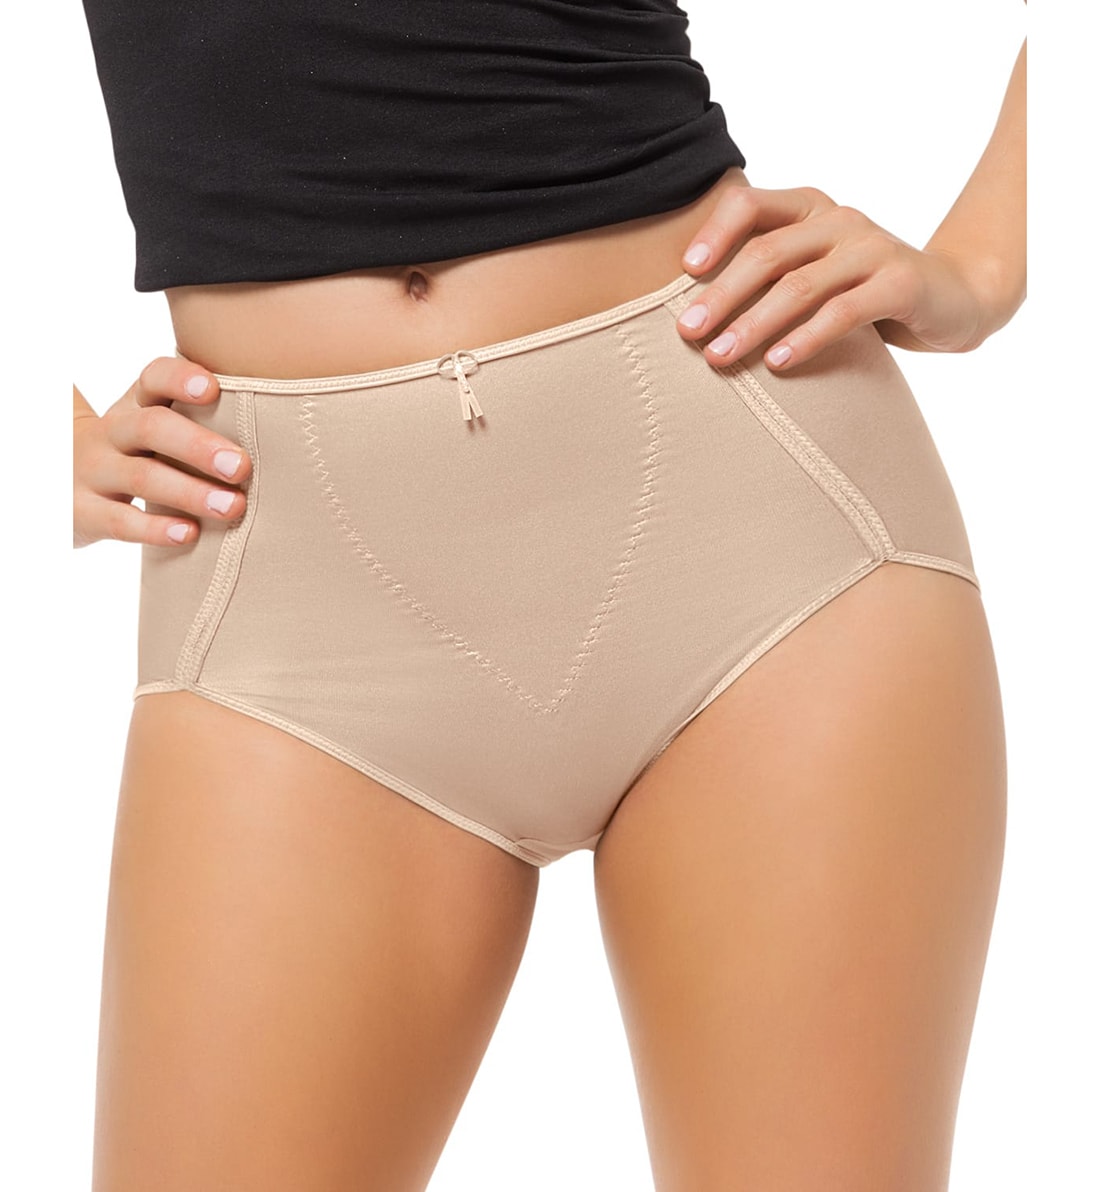 Leonisa High-Cut Firm Control Panty (0243),Small,Light Beige - Light Beige,Small